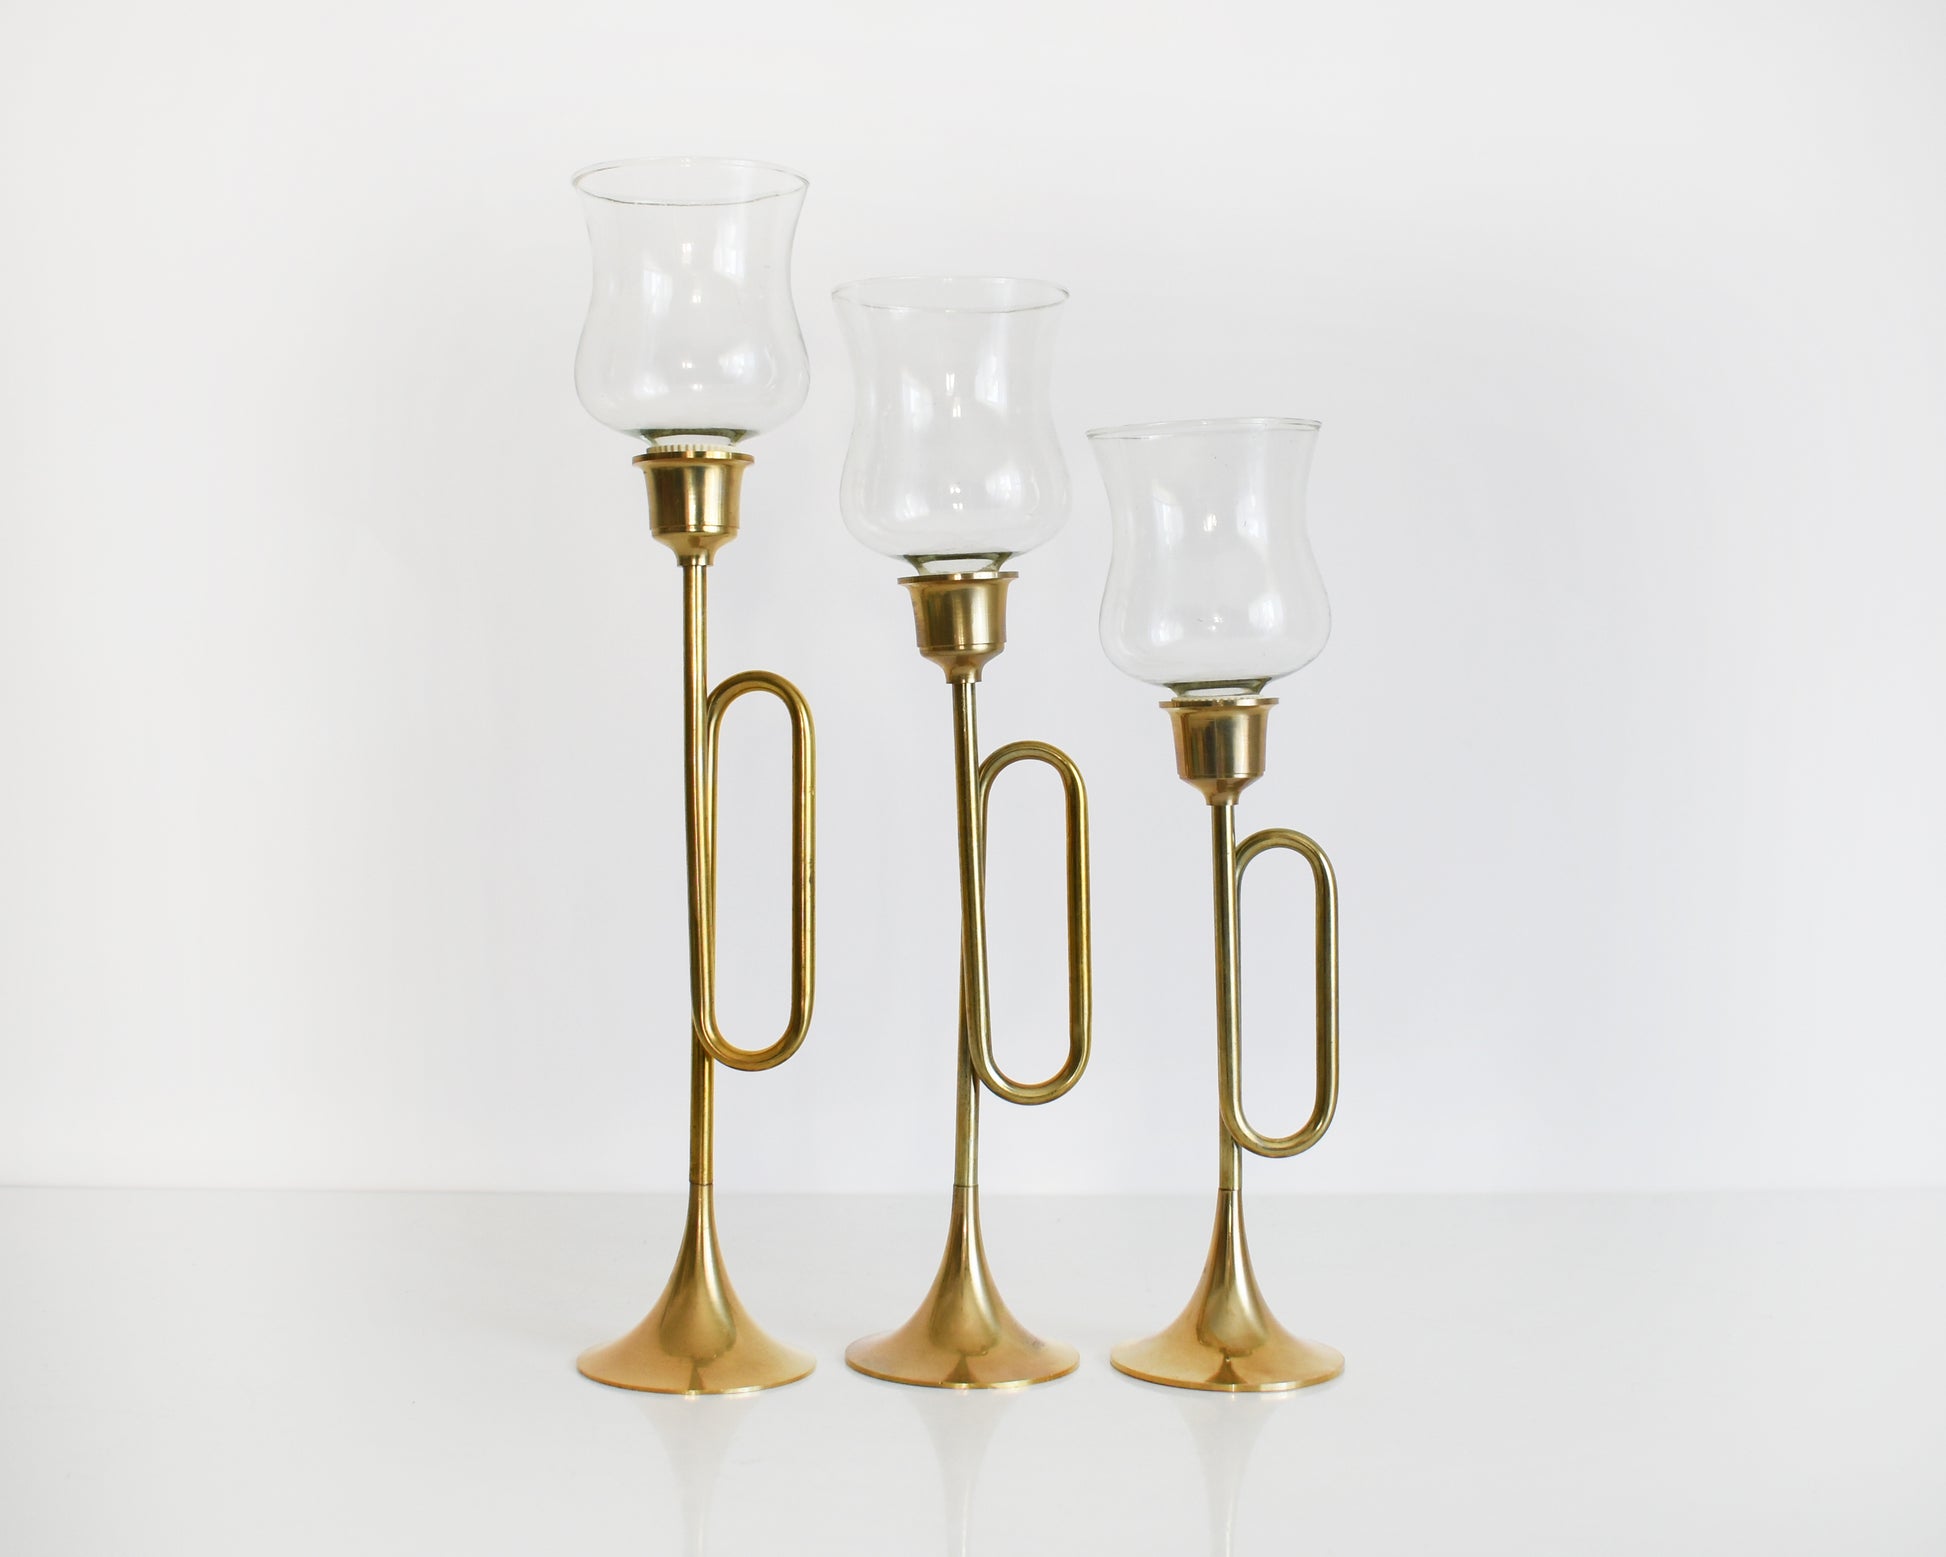 Three vintage brass bugle/horn candlesticks that has clear class votives on top.